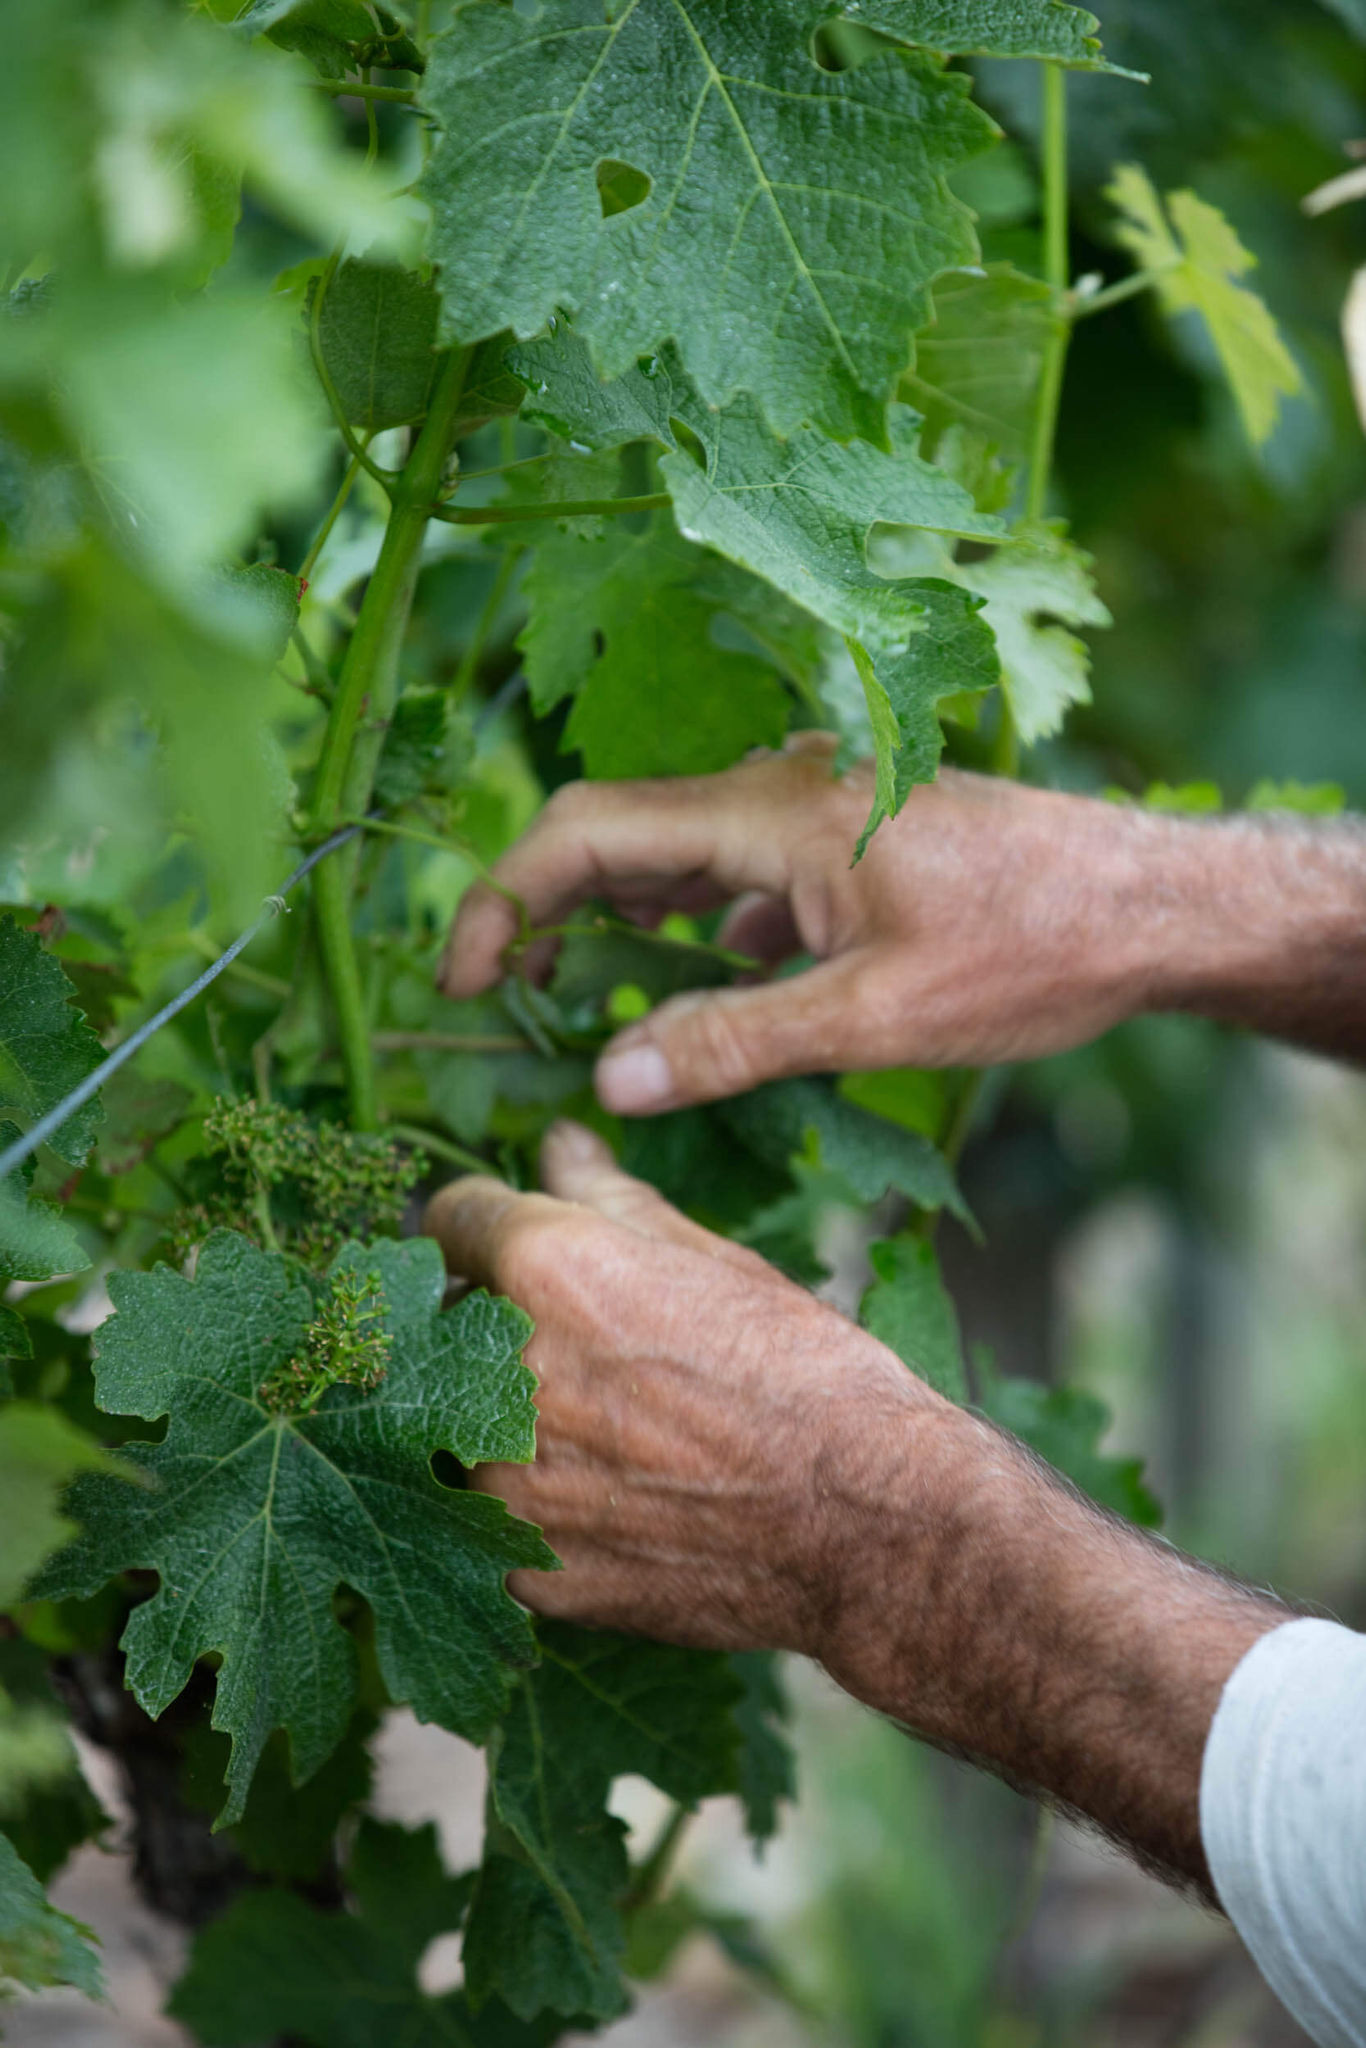 Positive initiatives in the vineyard - Dourthe